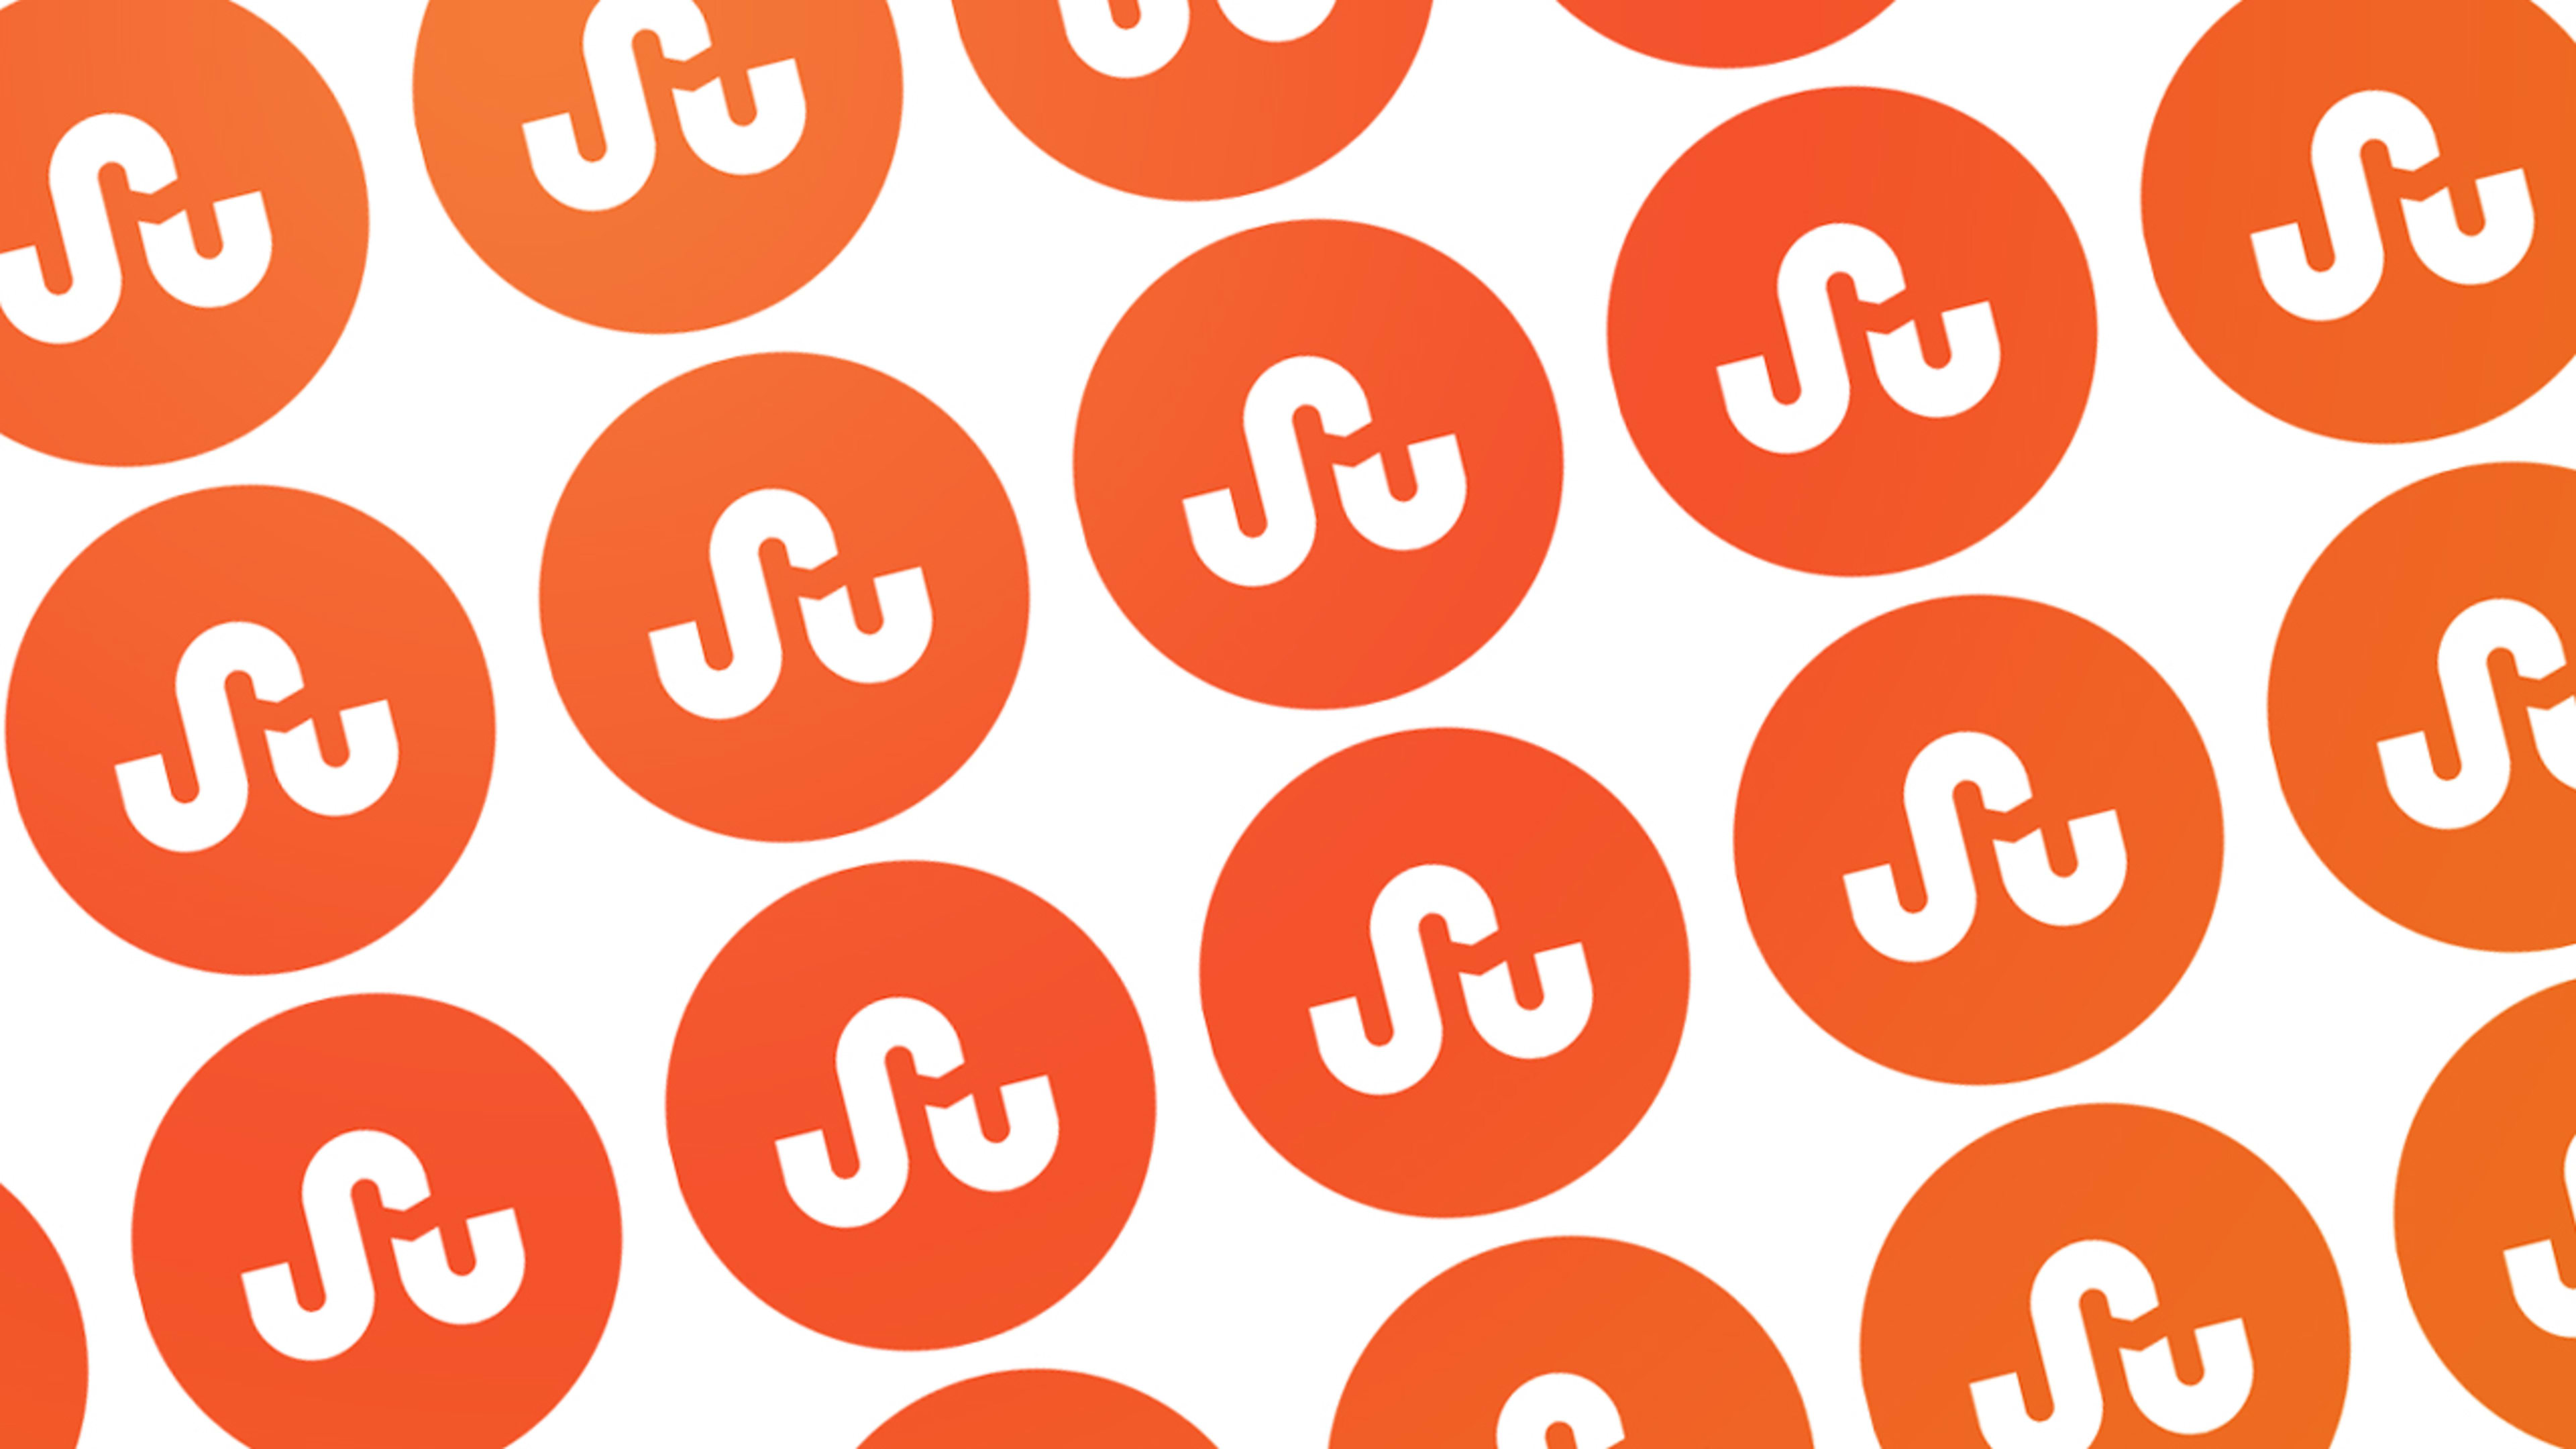 RIP StumbleUpon. You’ll be missed for the simpler internet you once represented